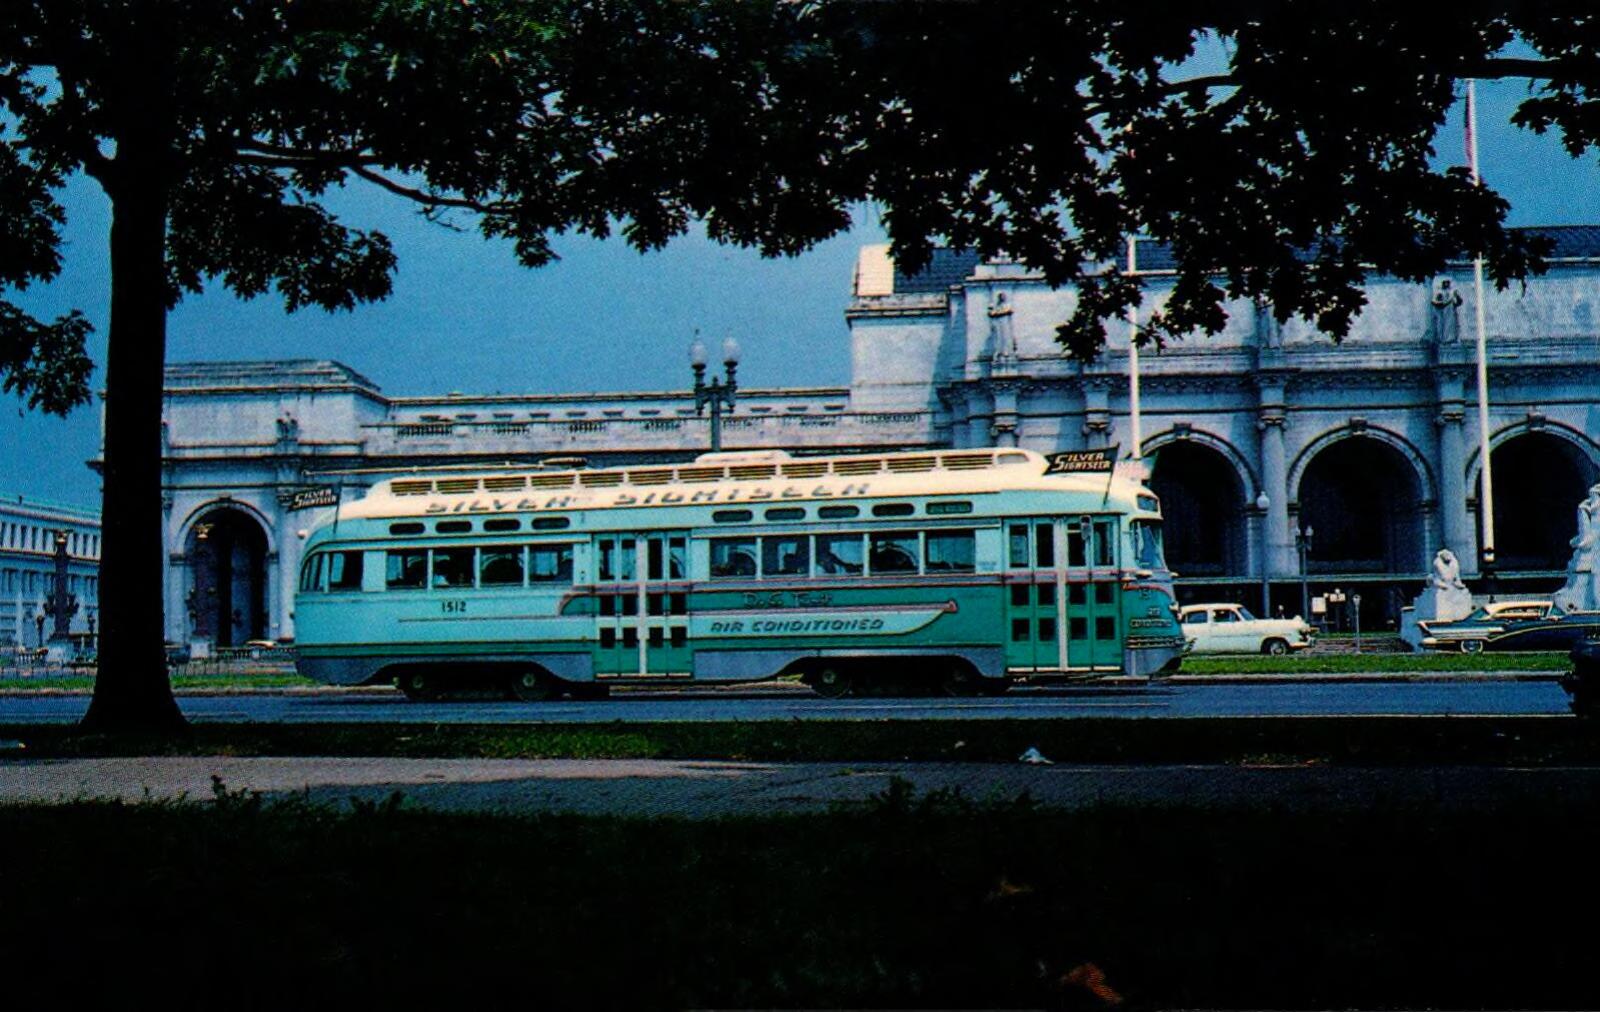 Silver Sightseer PCC trolley in 1960 - "This car had to be one of the most outstanding PCC cars in operation anywhere. Originally built by St. Louis Car Co. in 1945, the car saw several rebuildings and renumberings. In 1957 the car was revamped into a special car known as the "Silver Sightseer" for touring our Nation's Capitol. It even boasted a lovely hostess to narrate the trip. 1512 is shown here passing Union Station, Washington, D.C. August 28, 1960."